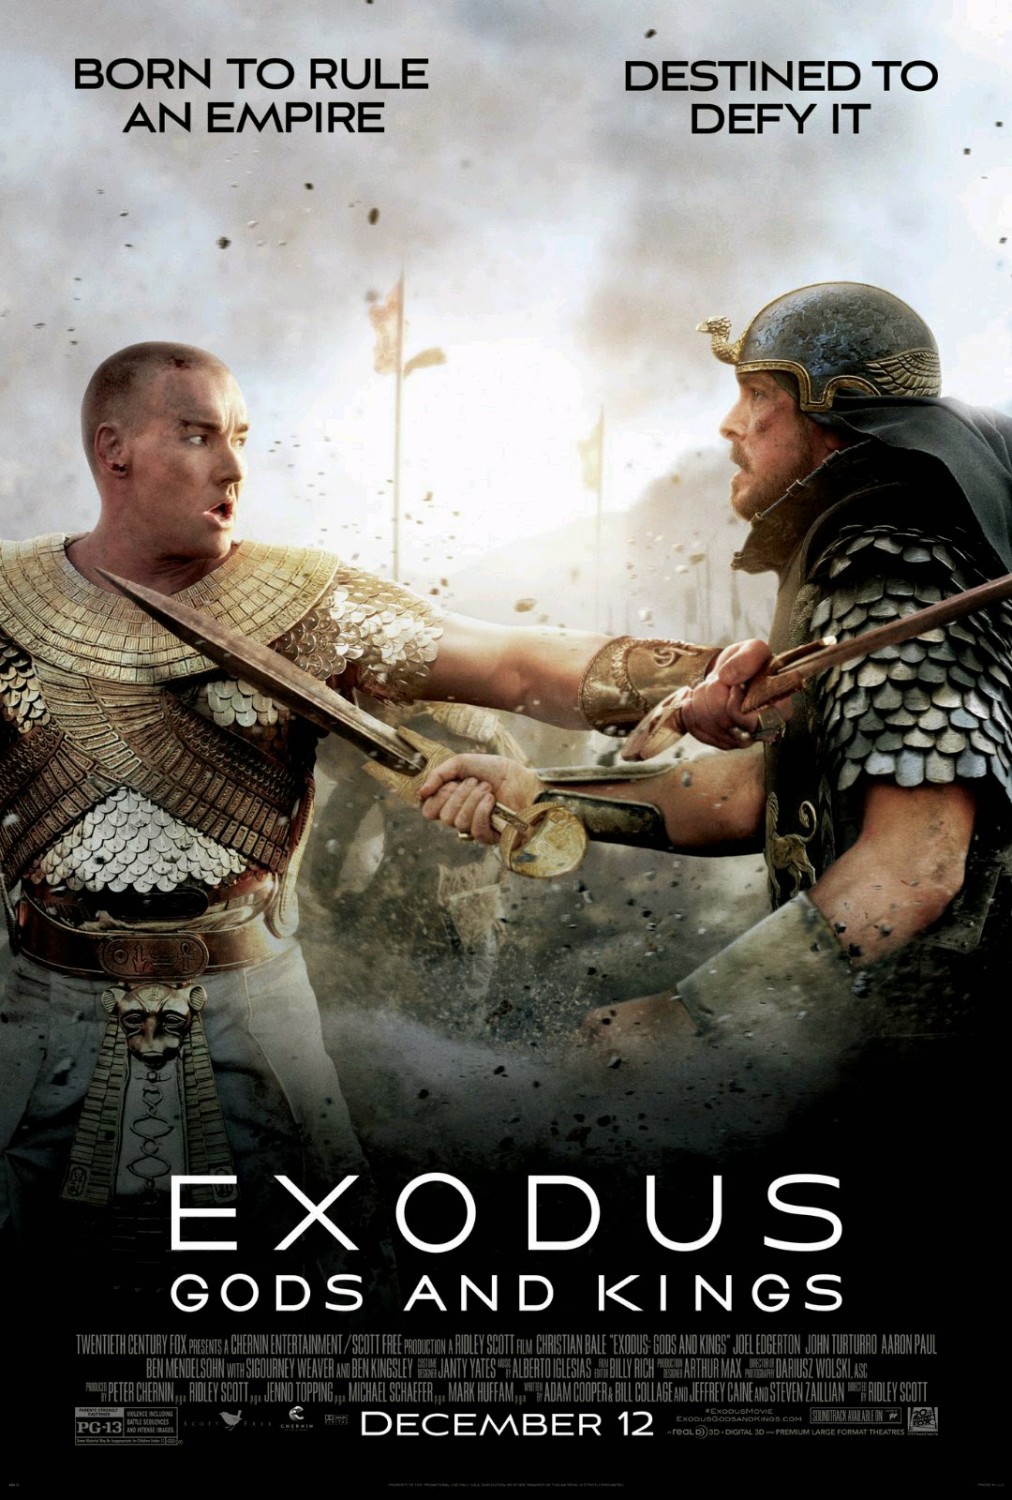 Action Exodus Gods And Kings 2014 1080p Bluray Dts X264 Hdmaniacs